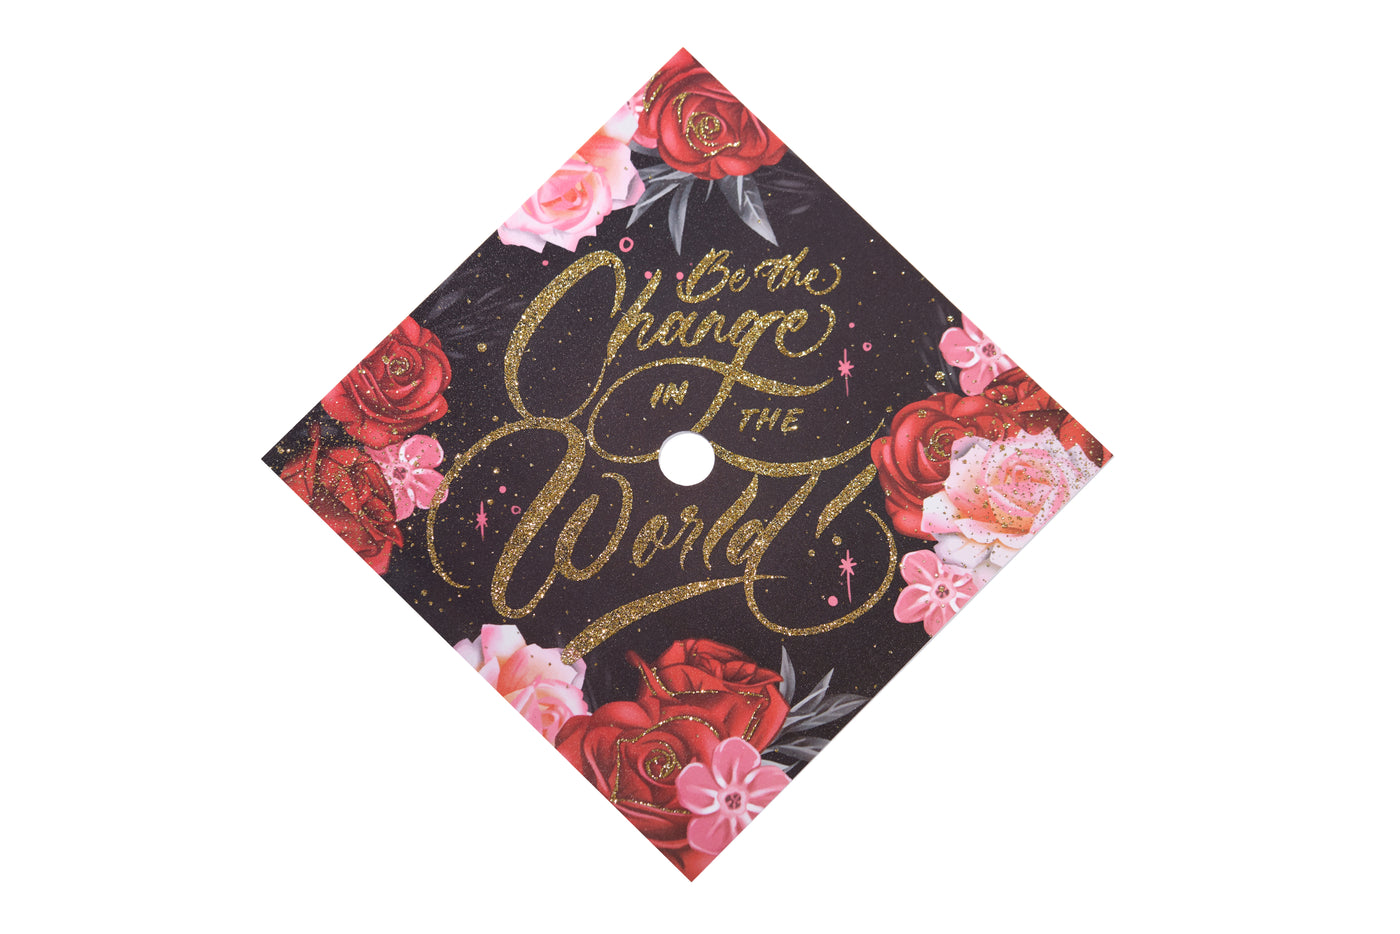 Graduation cap topper art print, Be the change in the world